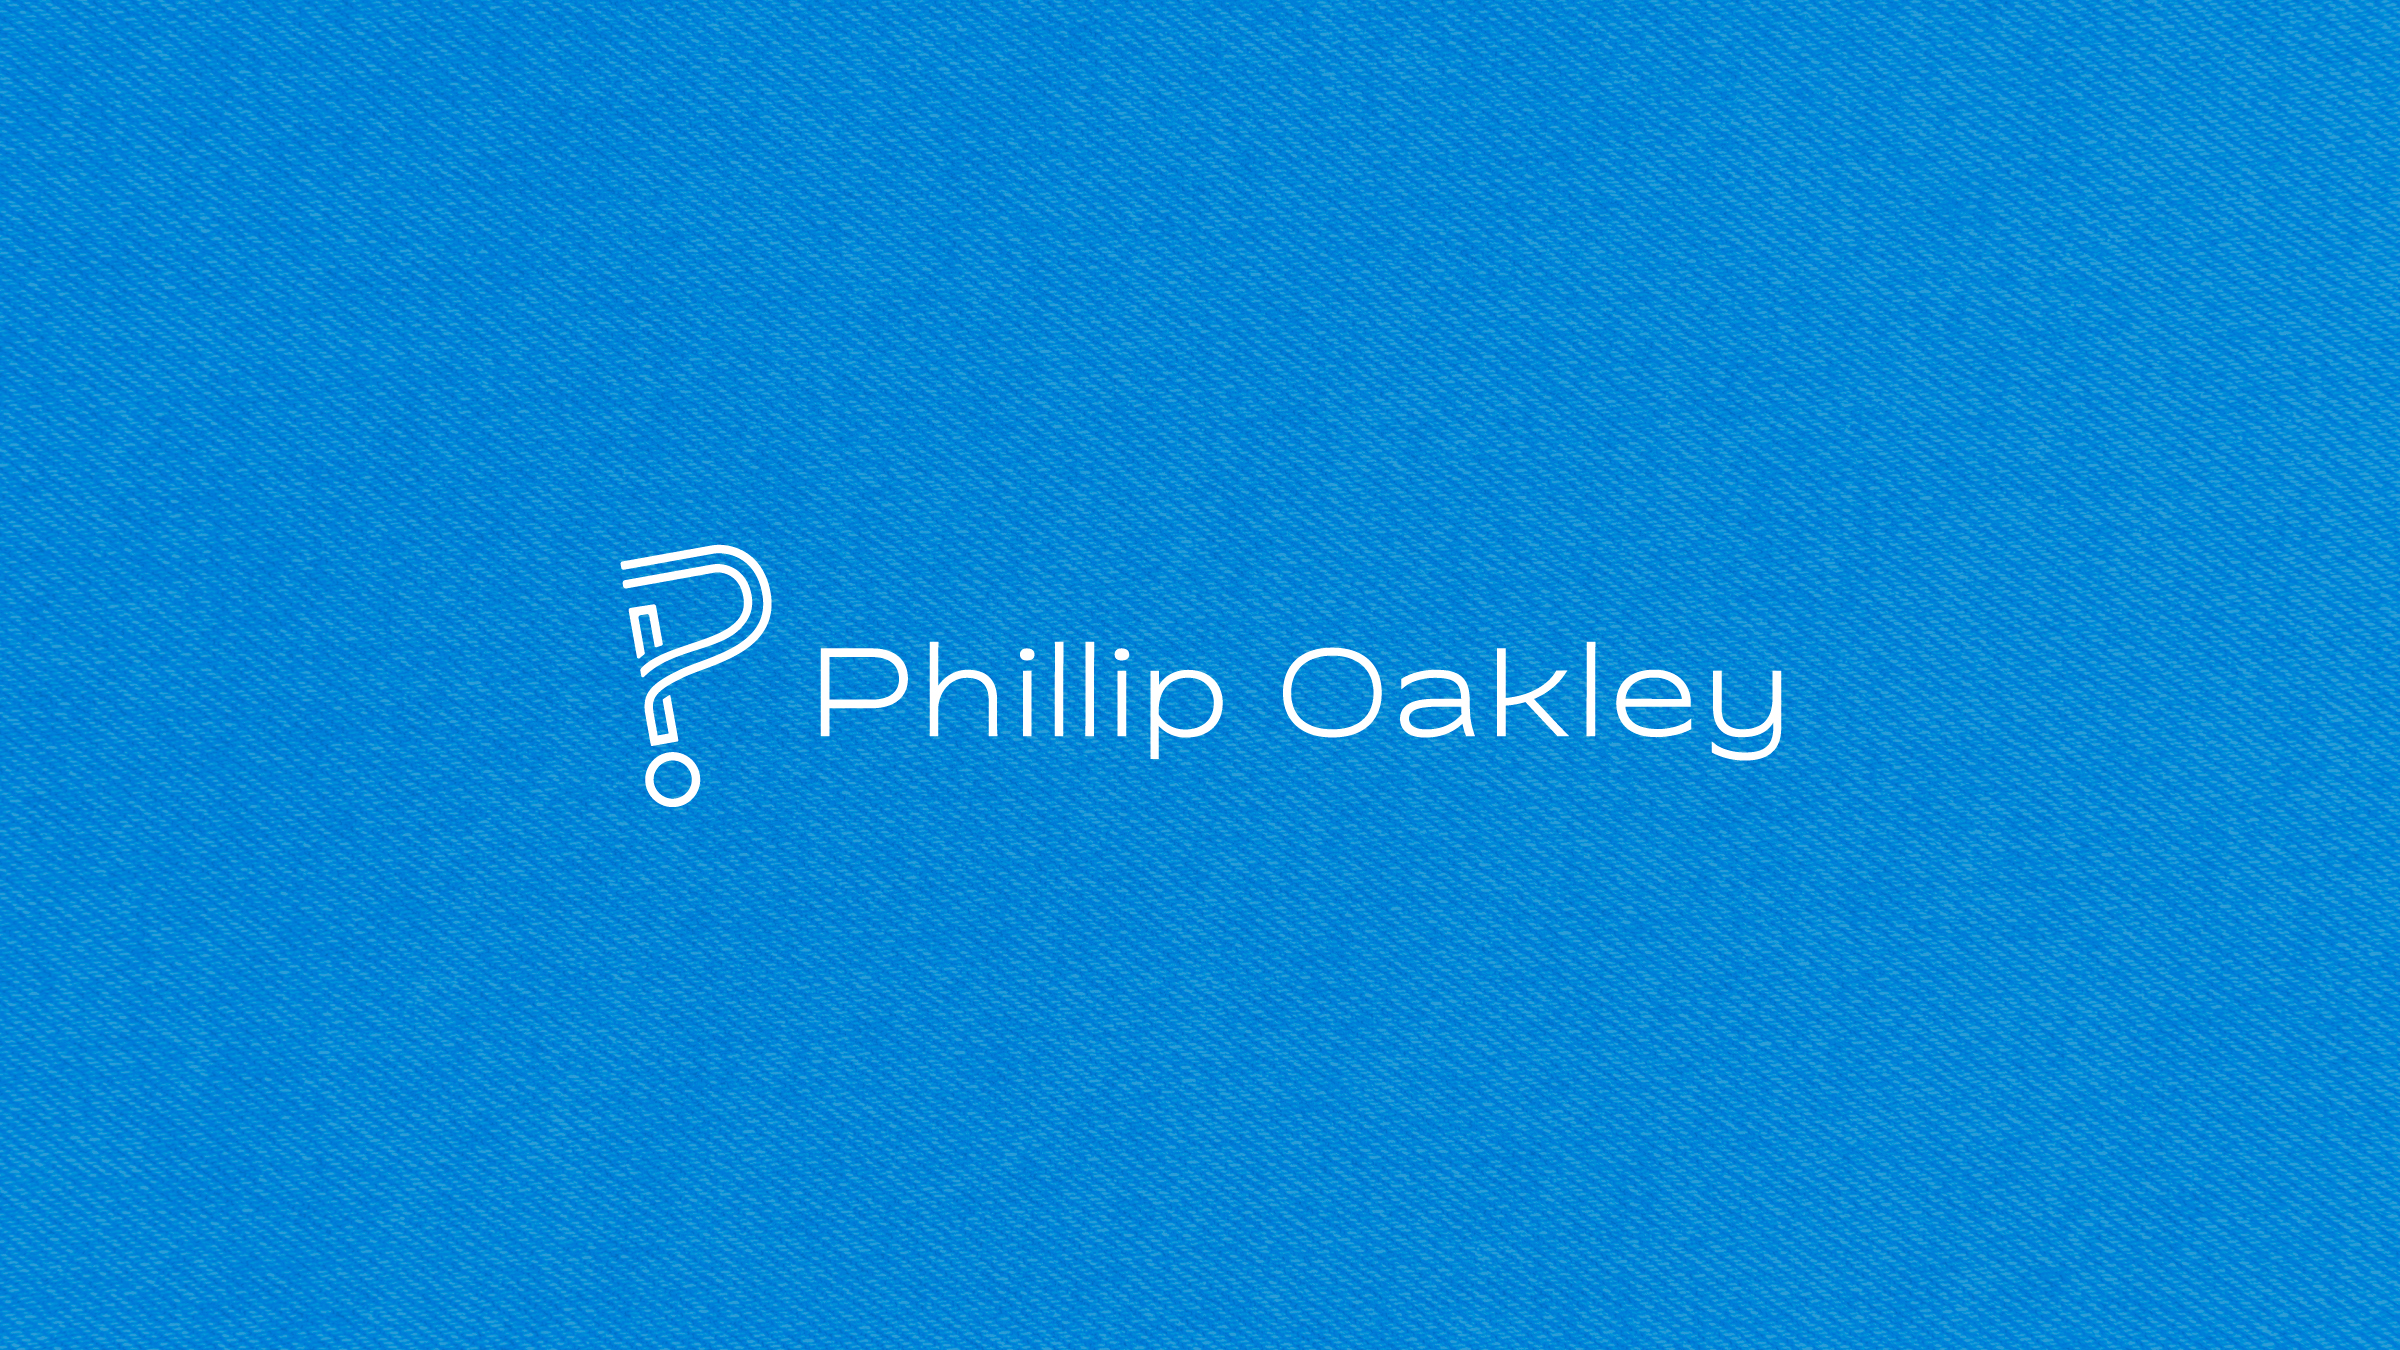 Featured image for “Phillip Oakley”